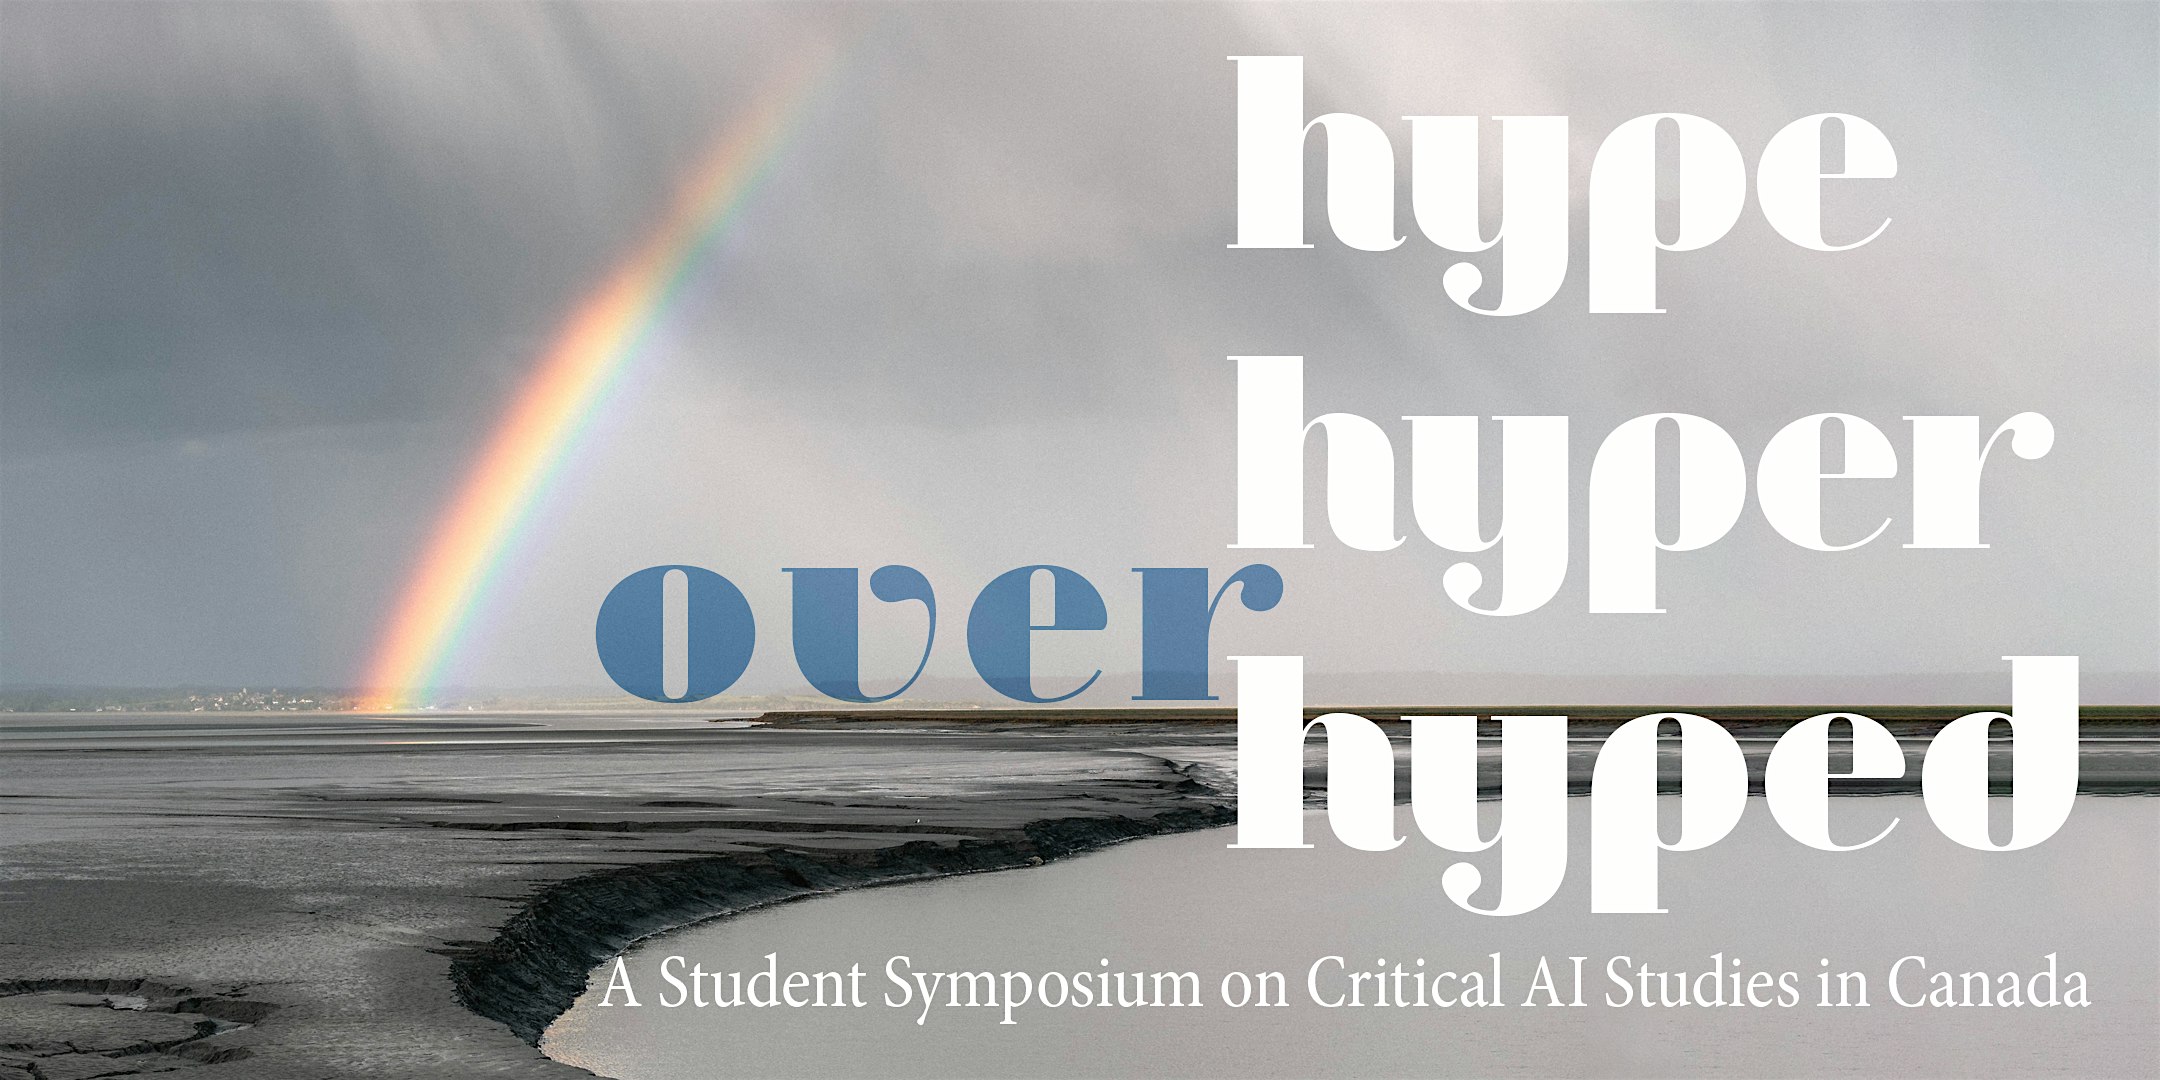 Hyper, hype, or over-hyped? A Student Symposium on Critical AI Studies